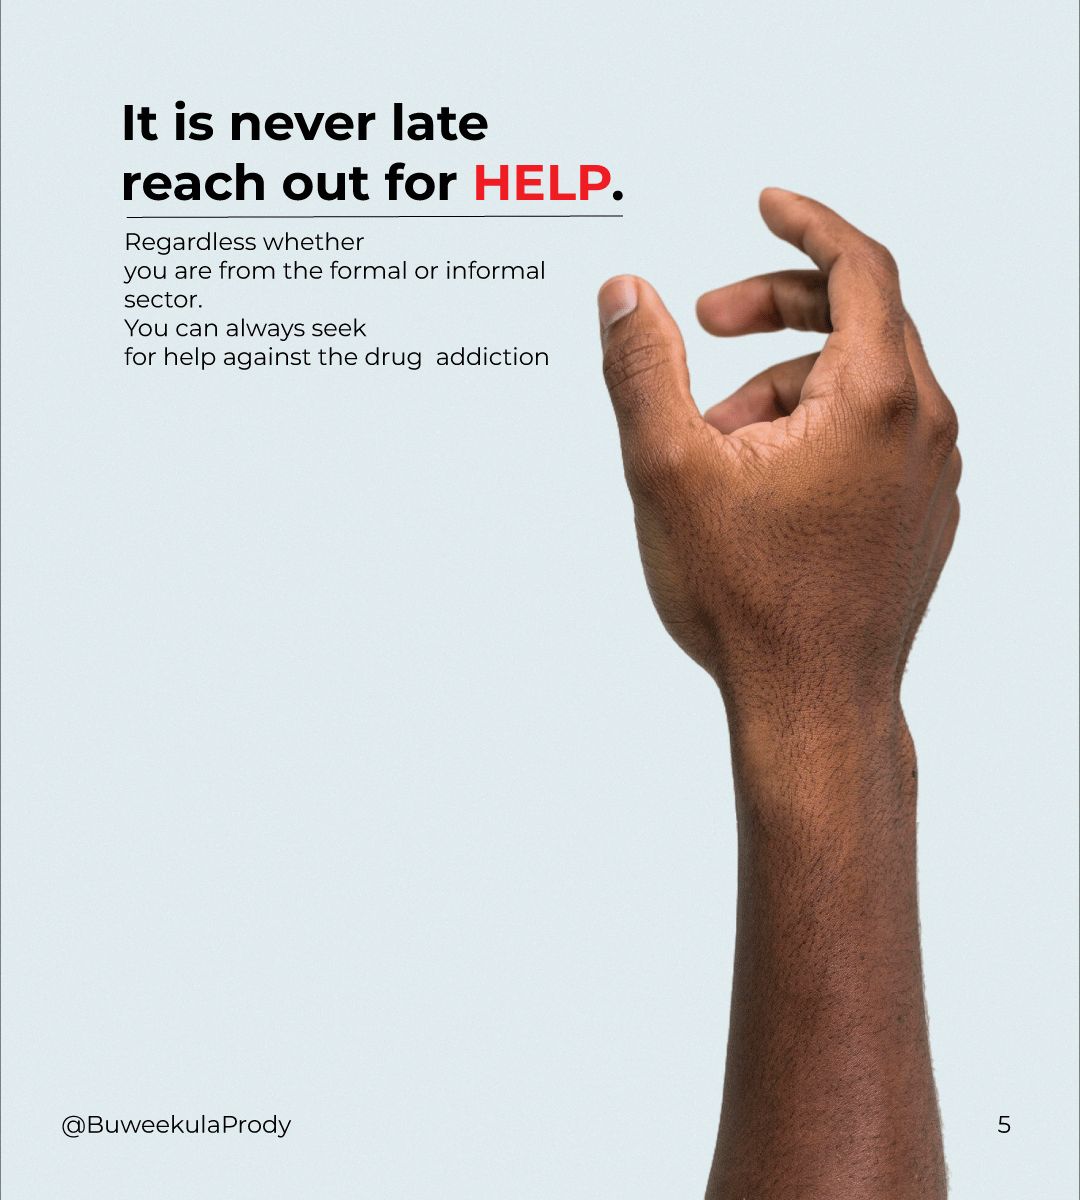 #30daysofDrugAddictionAwareness It's never late to reach out for help 5/30